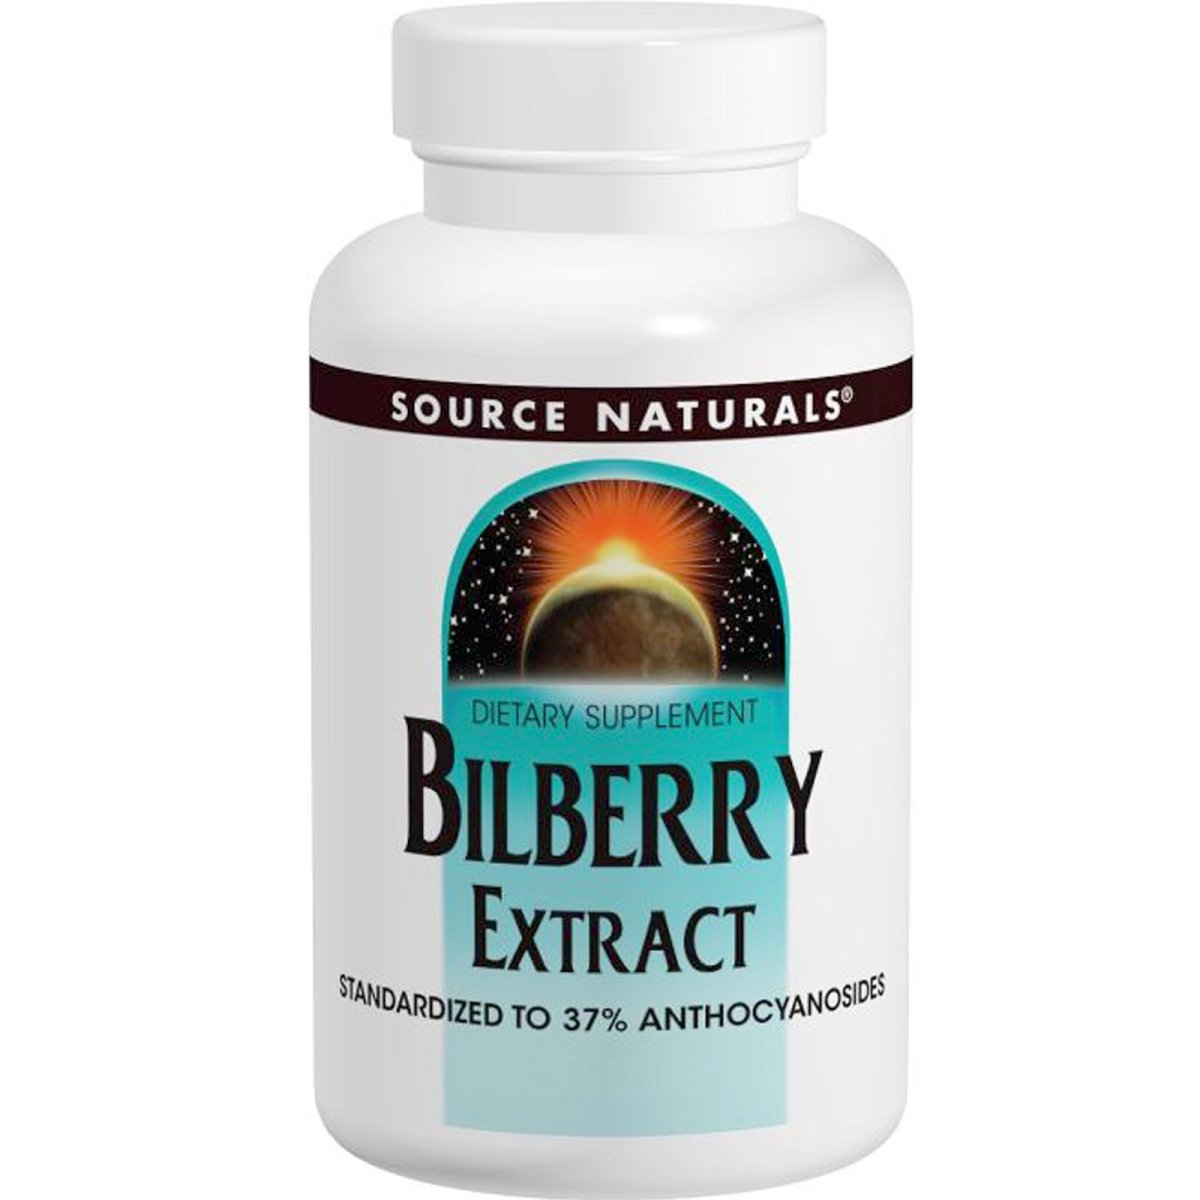 BILBERRY EXTRACT - 50MG - 120 Tablets